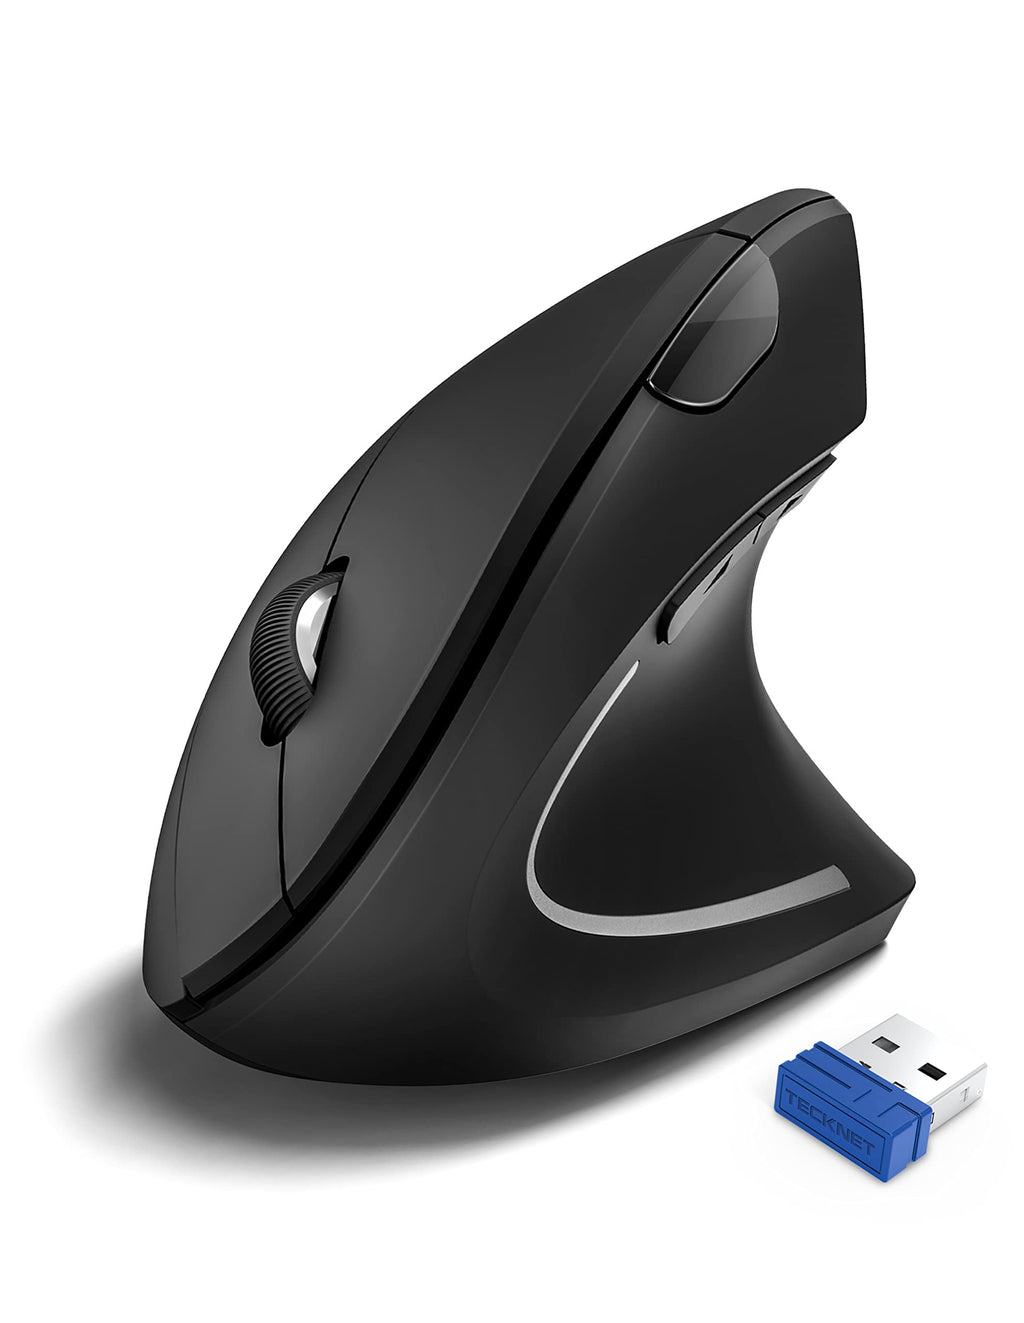 TECKNET Ergonomic Mouse, 4800 DPI Silent Mouse 5 Adjustable DPI, Wireless Mouse 2.4G Vertical Mouse 6 Buttons Computer Mouse Compatible with Windows/Mac/Chromebook/Linux/Notebook/Laptop/Computer style2